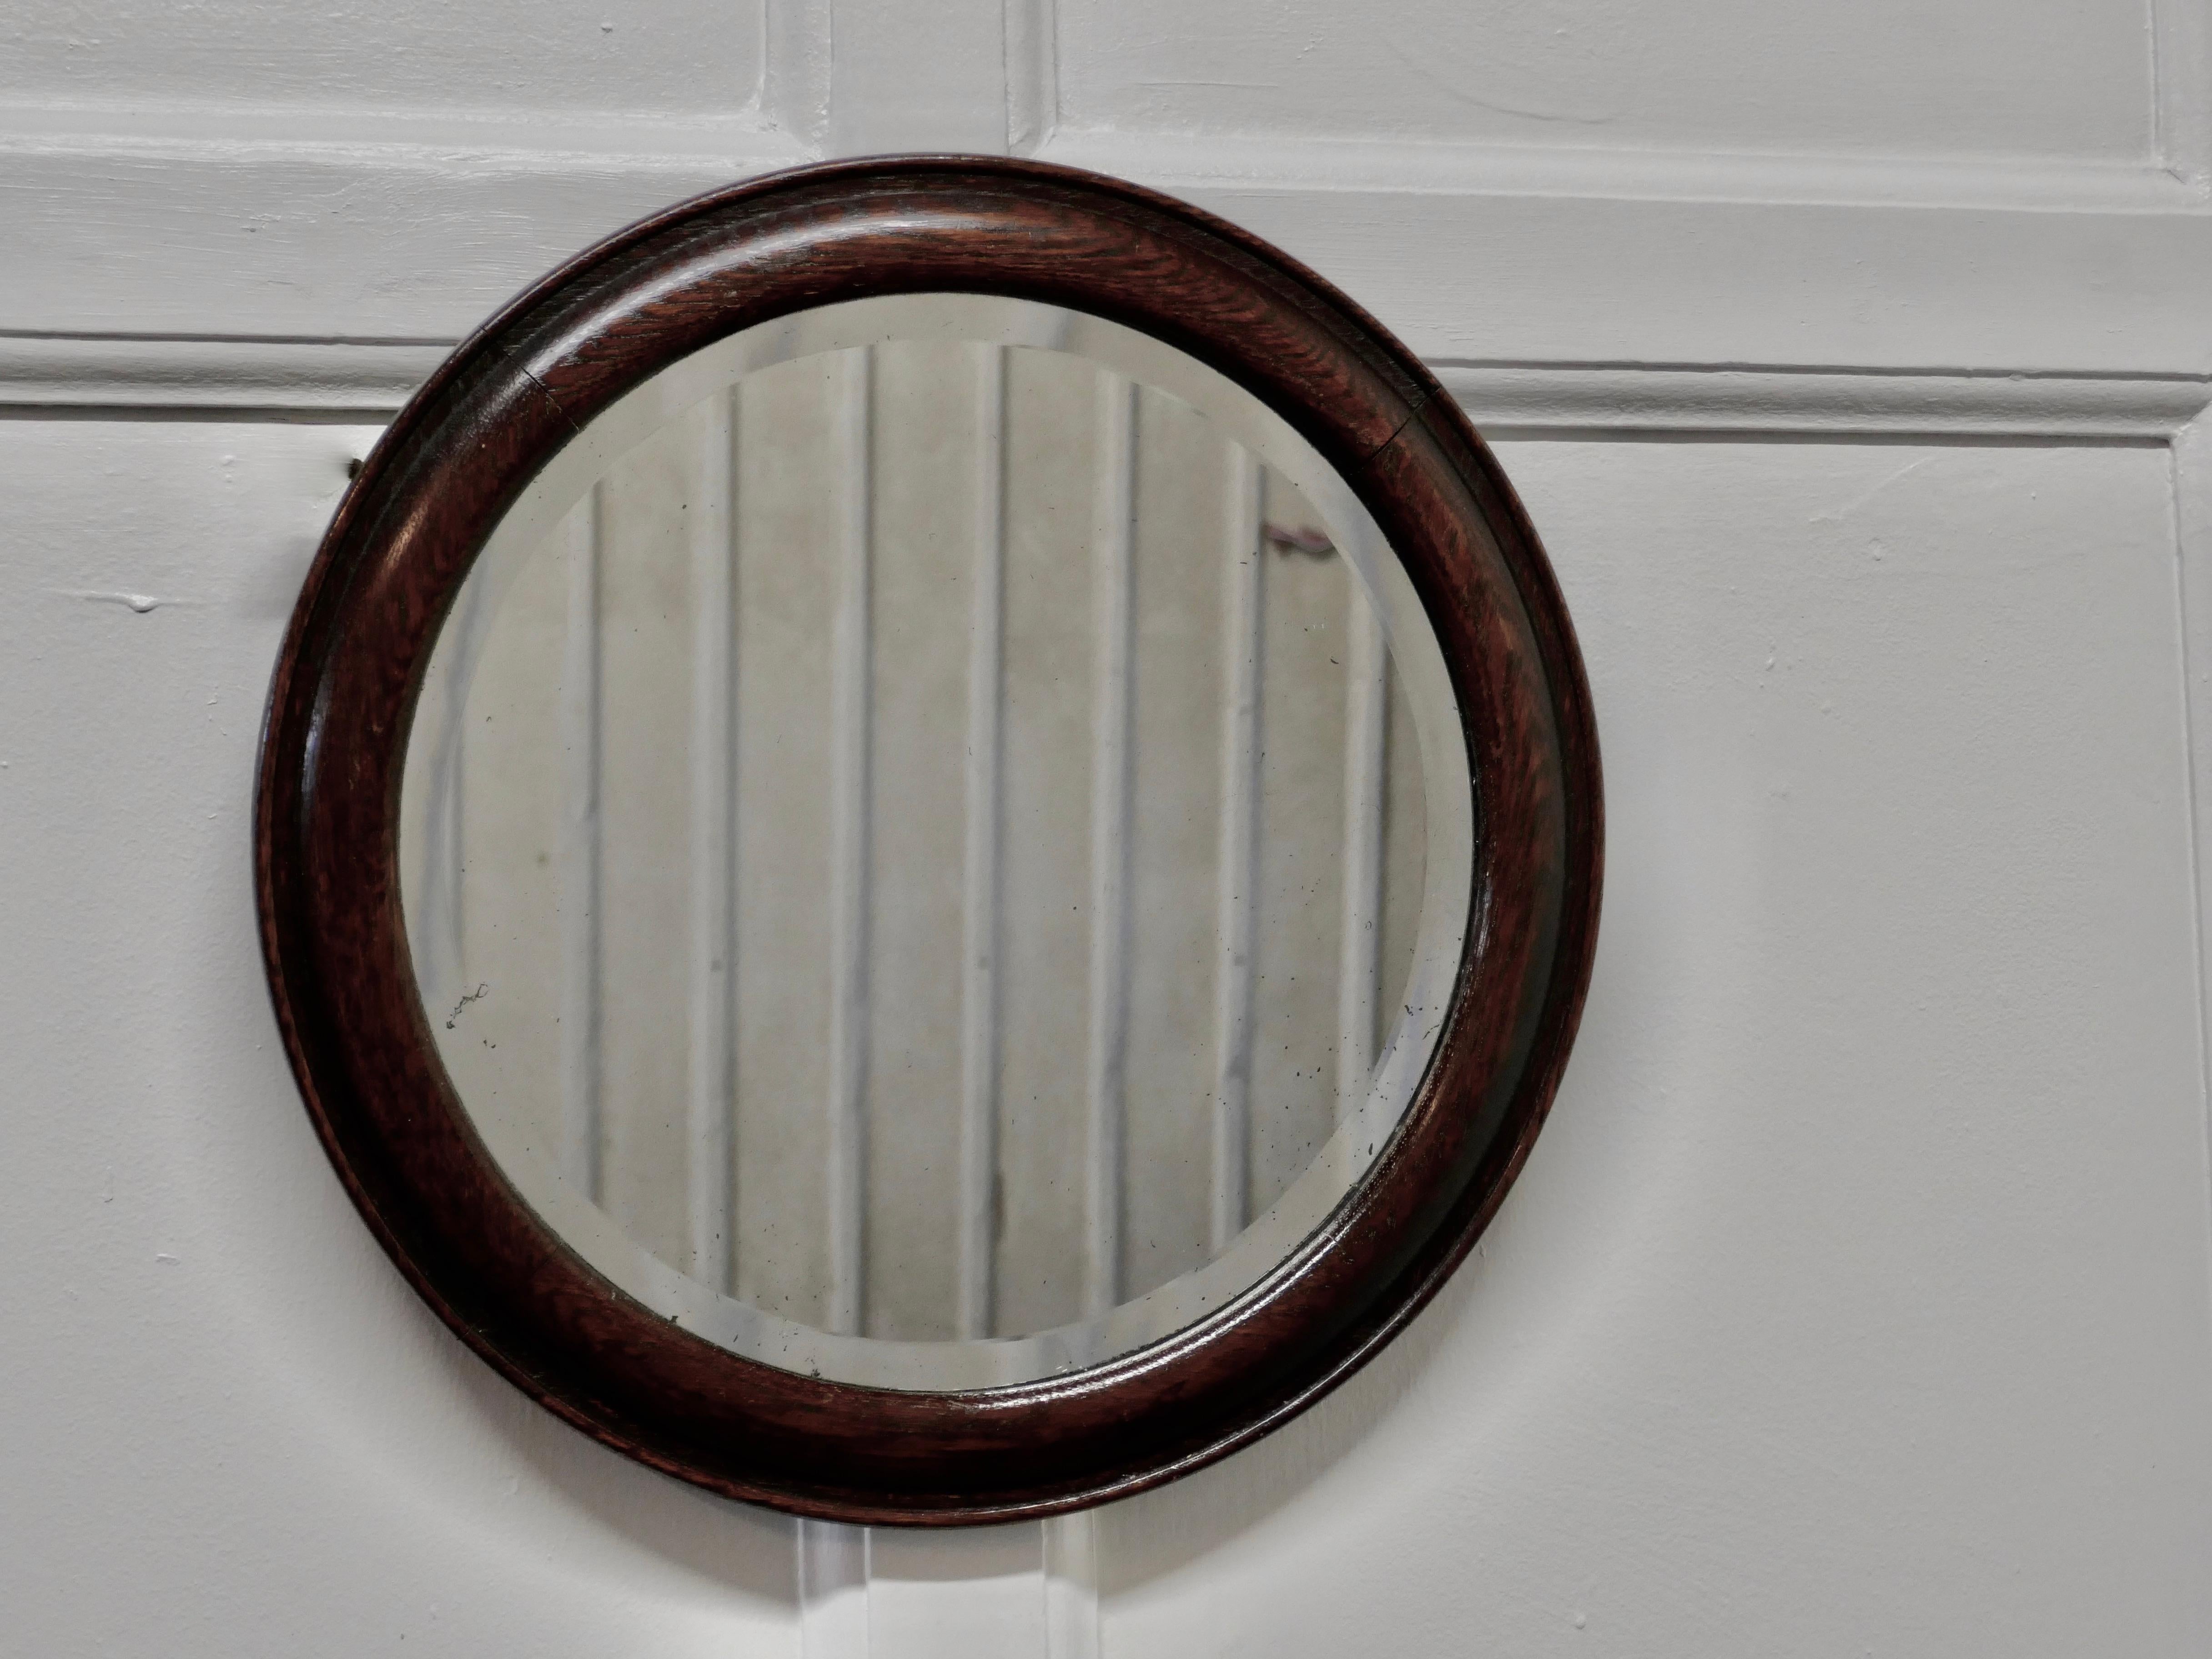 19th century round oak wall mirror

This is a lovely Victorian mirror, the mirror has a 2” moulded oak frame it is in good condition and has the original beveled glass, this has very slight foxing but nothing very noticeable
A lovely decorative